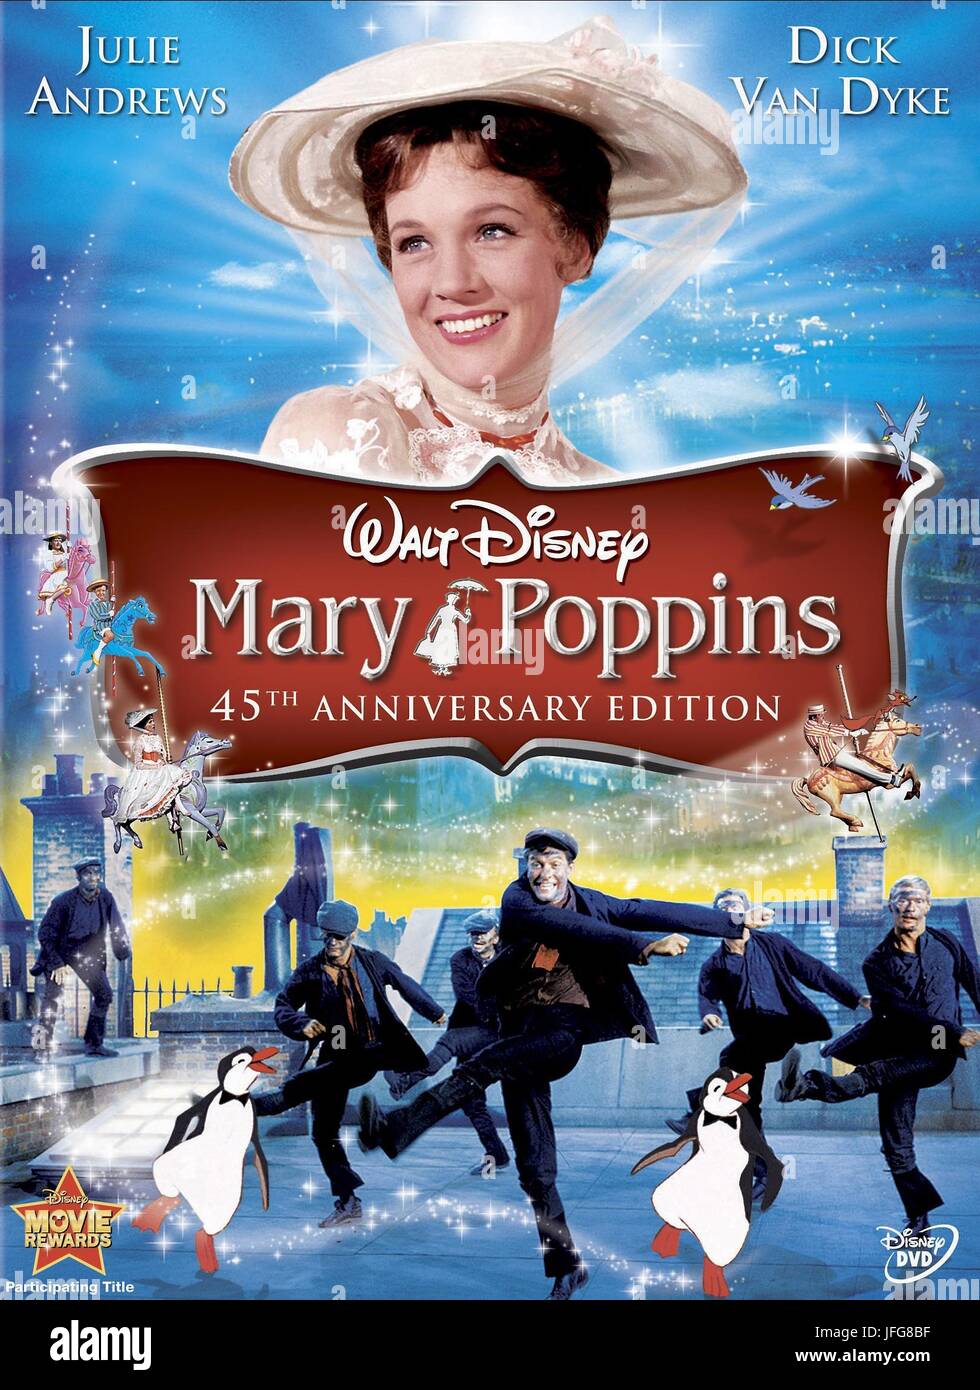 JULIE ANDREWS POSTER MARY POPPINS (1964 Stock Photo - Alamy